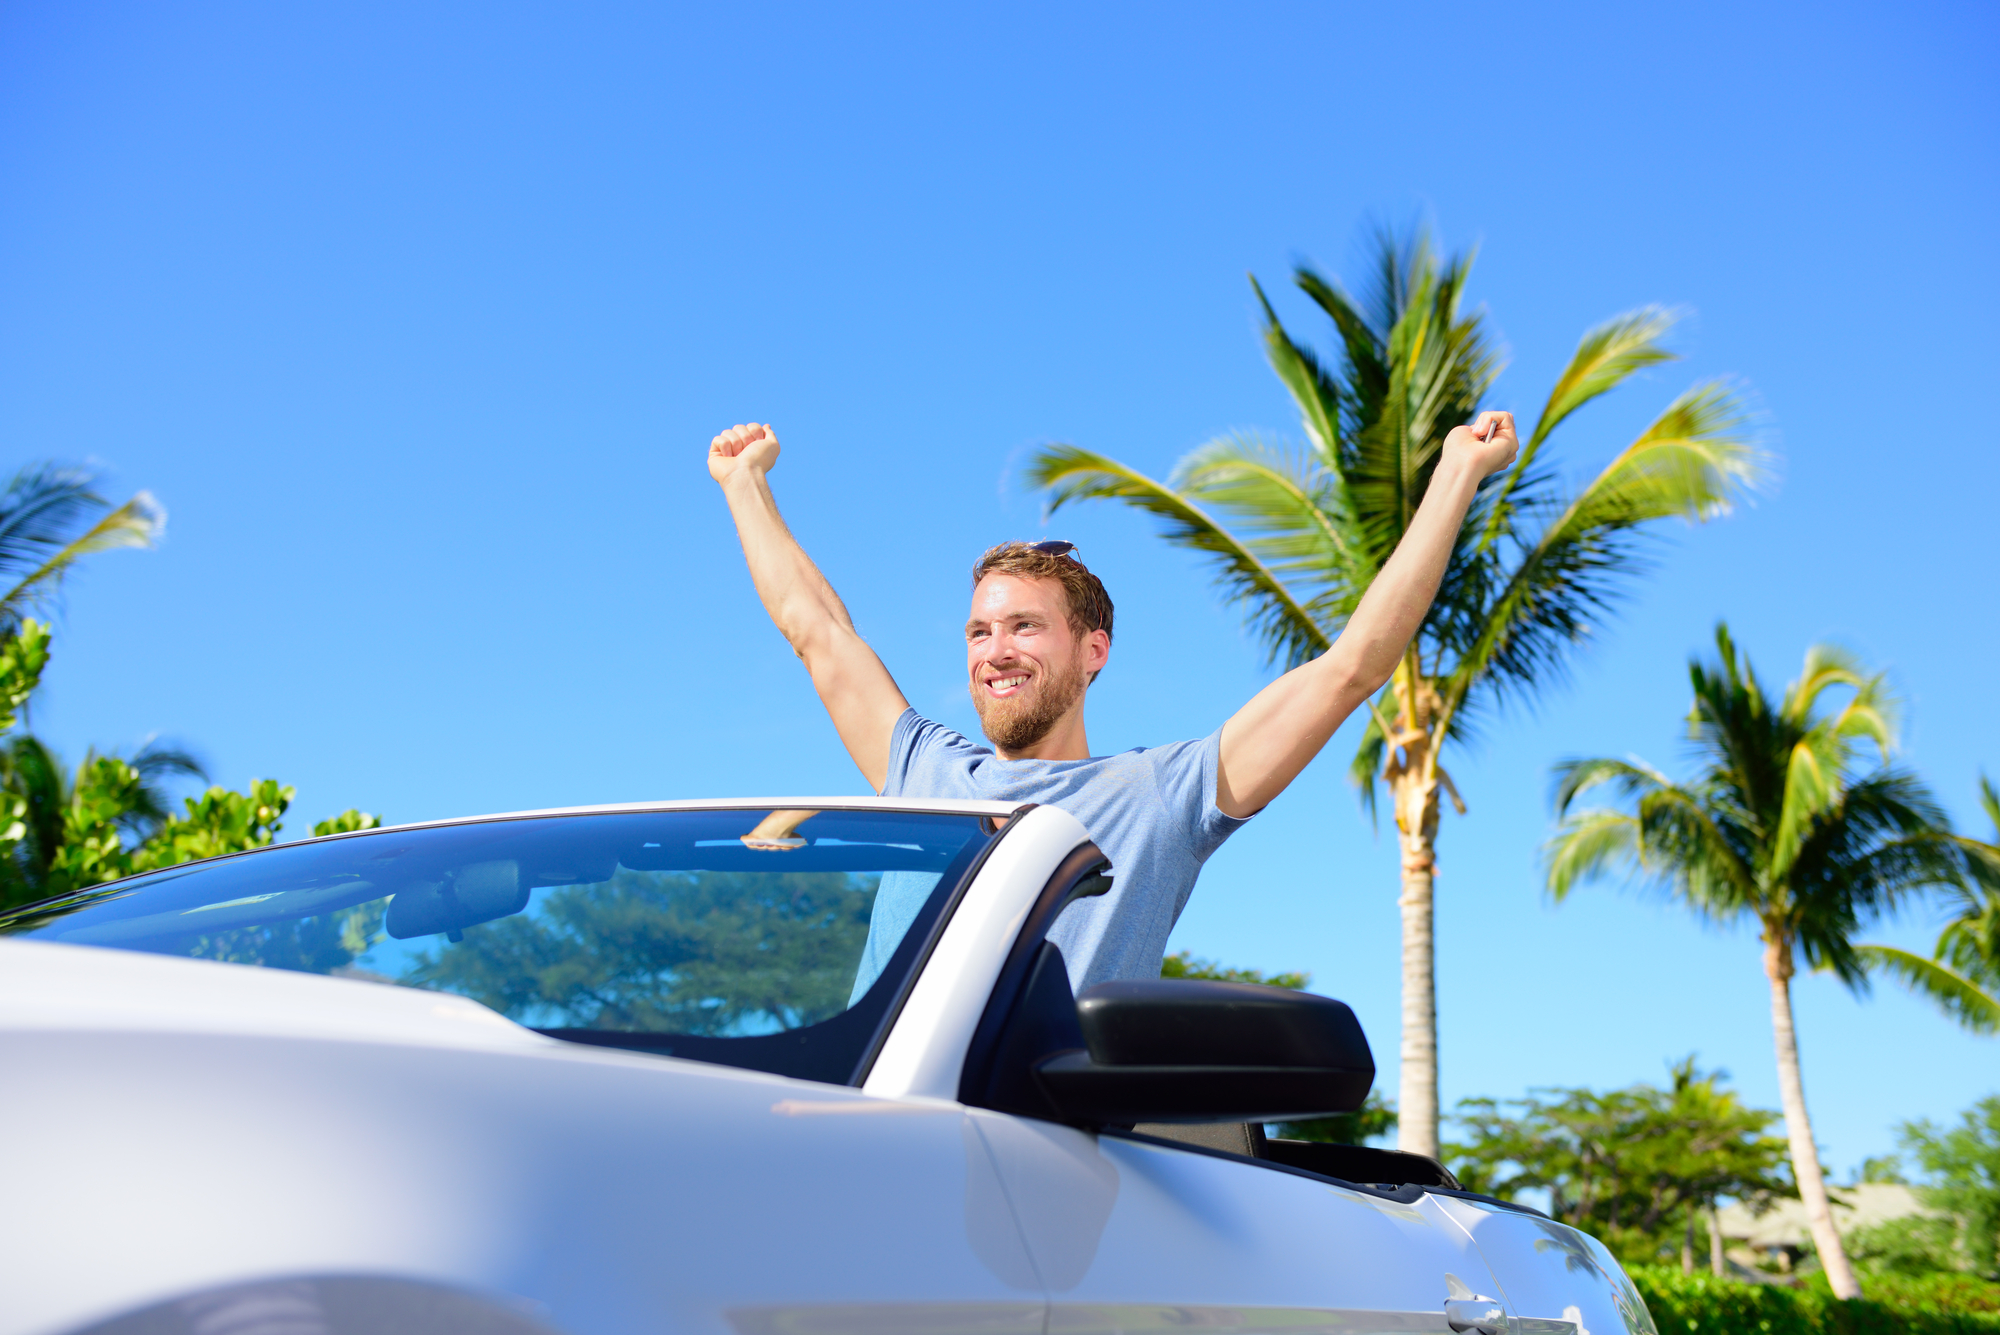 Car Rental Companies: A Comprehensive Guide to Finding the Best Option in Any Country